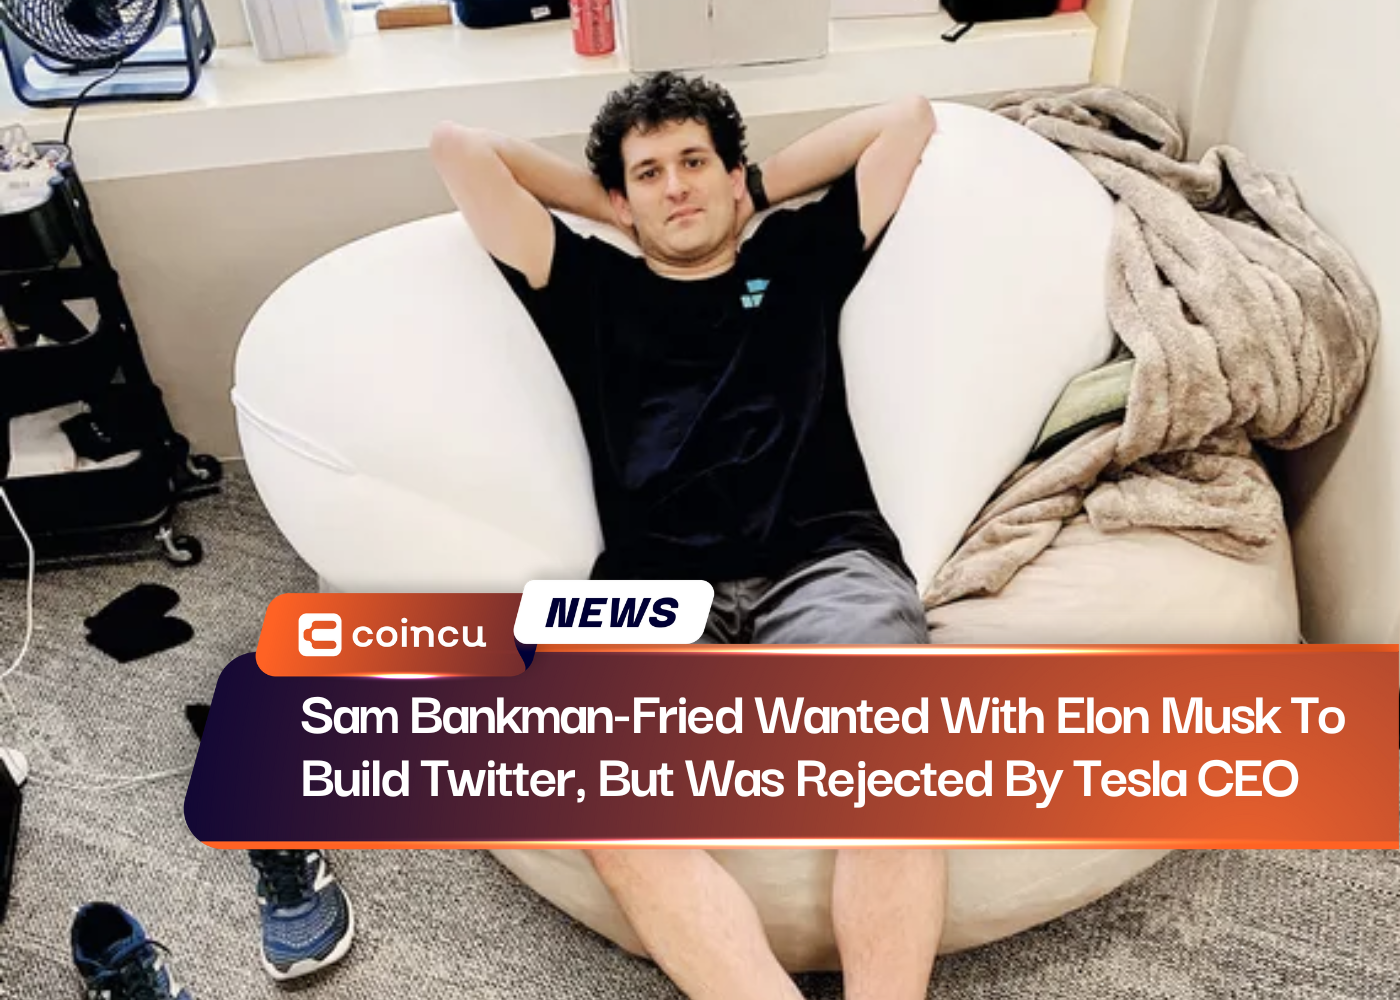 Sam Bankman-Fried Wanted With Elon Musk To Build Twitter, But Was Rejected By Tesla CEO